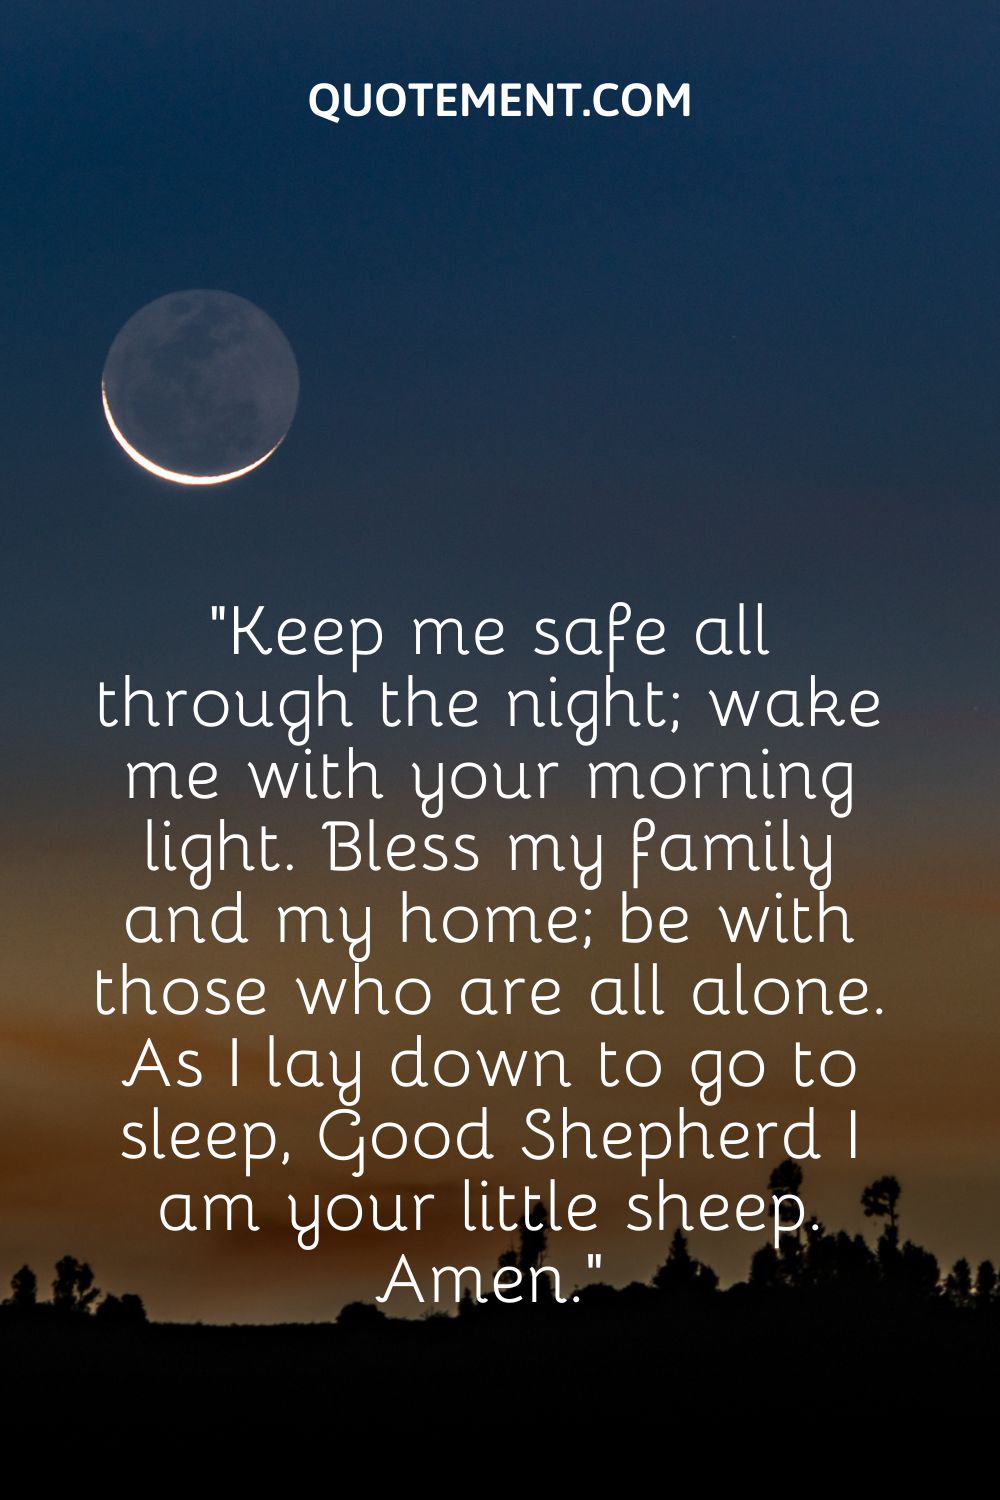 Keep me safe all through the night